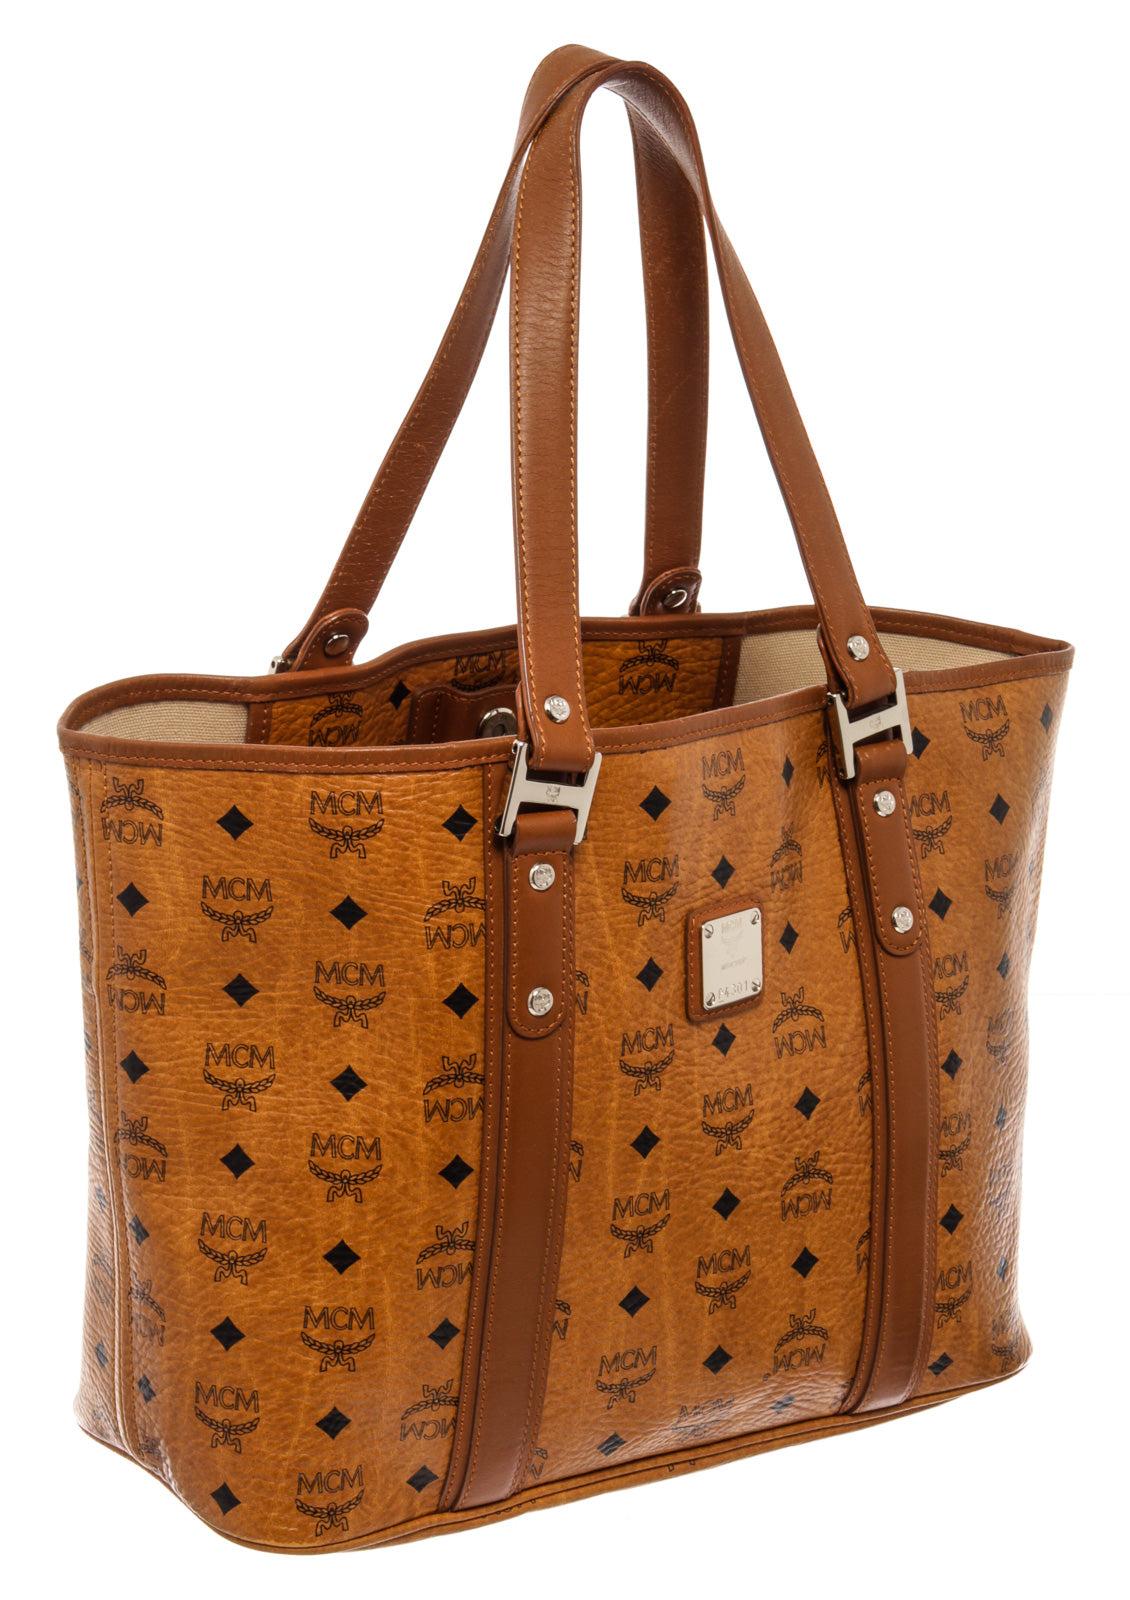 MCM Shopper tote bag is crafted from cognac Visetos coated canvas and brown leather. This shopper tote is held by dual flat handles, complete with silver-tone hardware and comes with a spacious light brown woven canvas interior lining meant to hold